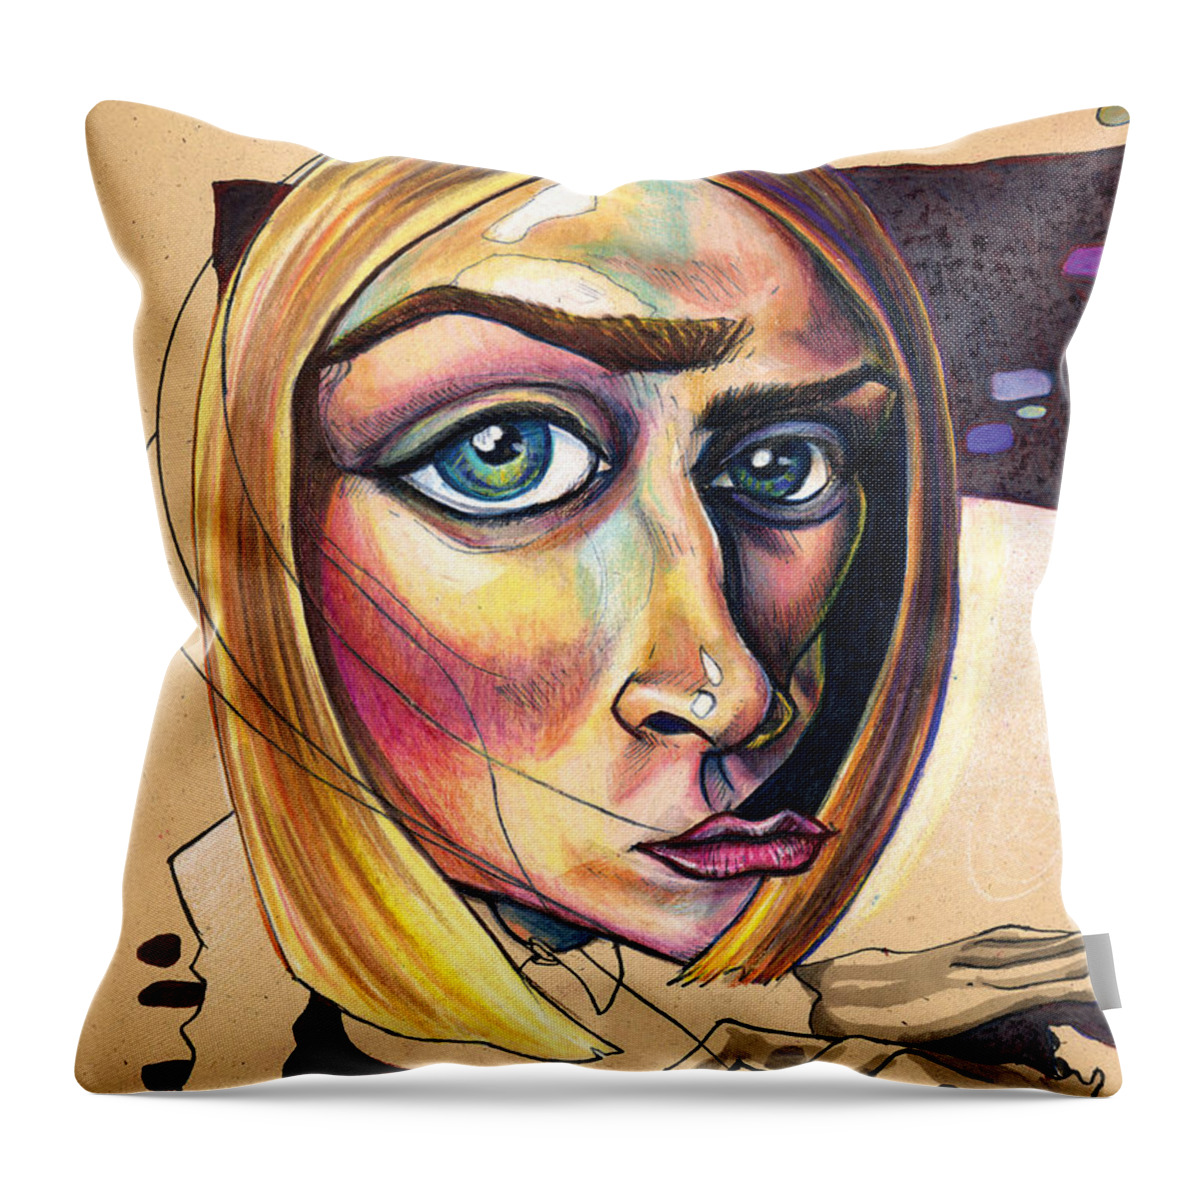 Beauty Throw Pillow featuring the drawing Distorted Beauty by John Ashton Golden